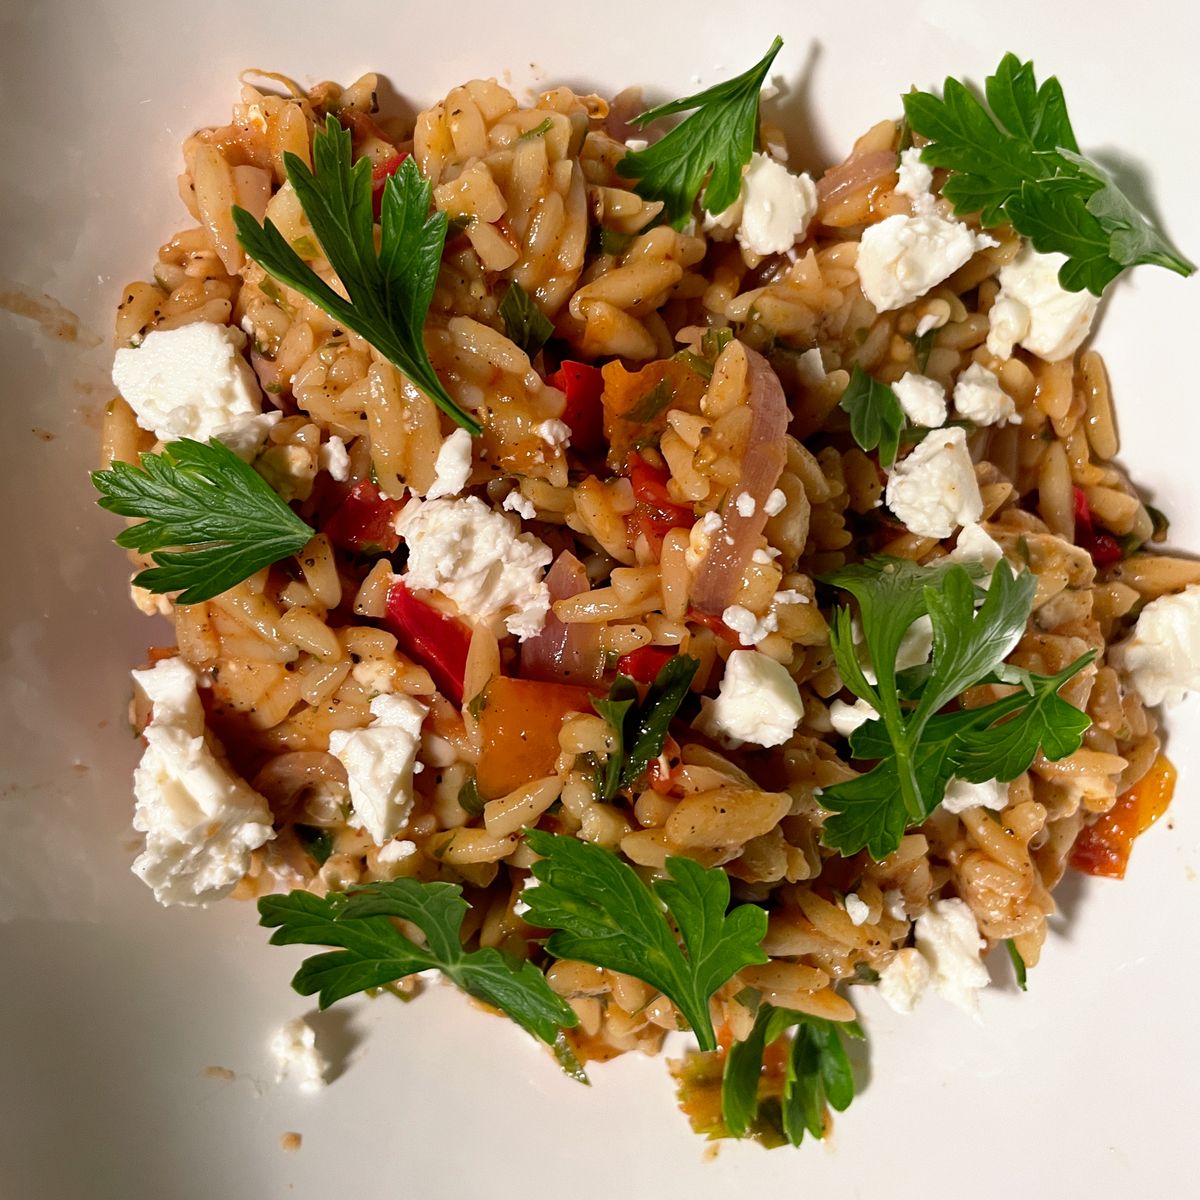 Orzo With San Marzano Tomatoes, Parsley, and Feta (Greek-inspired)